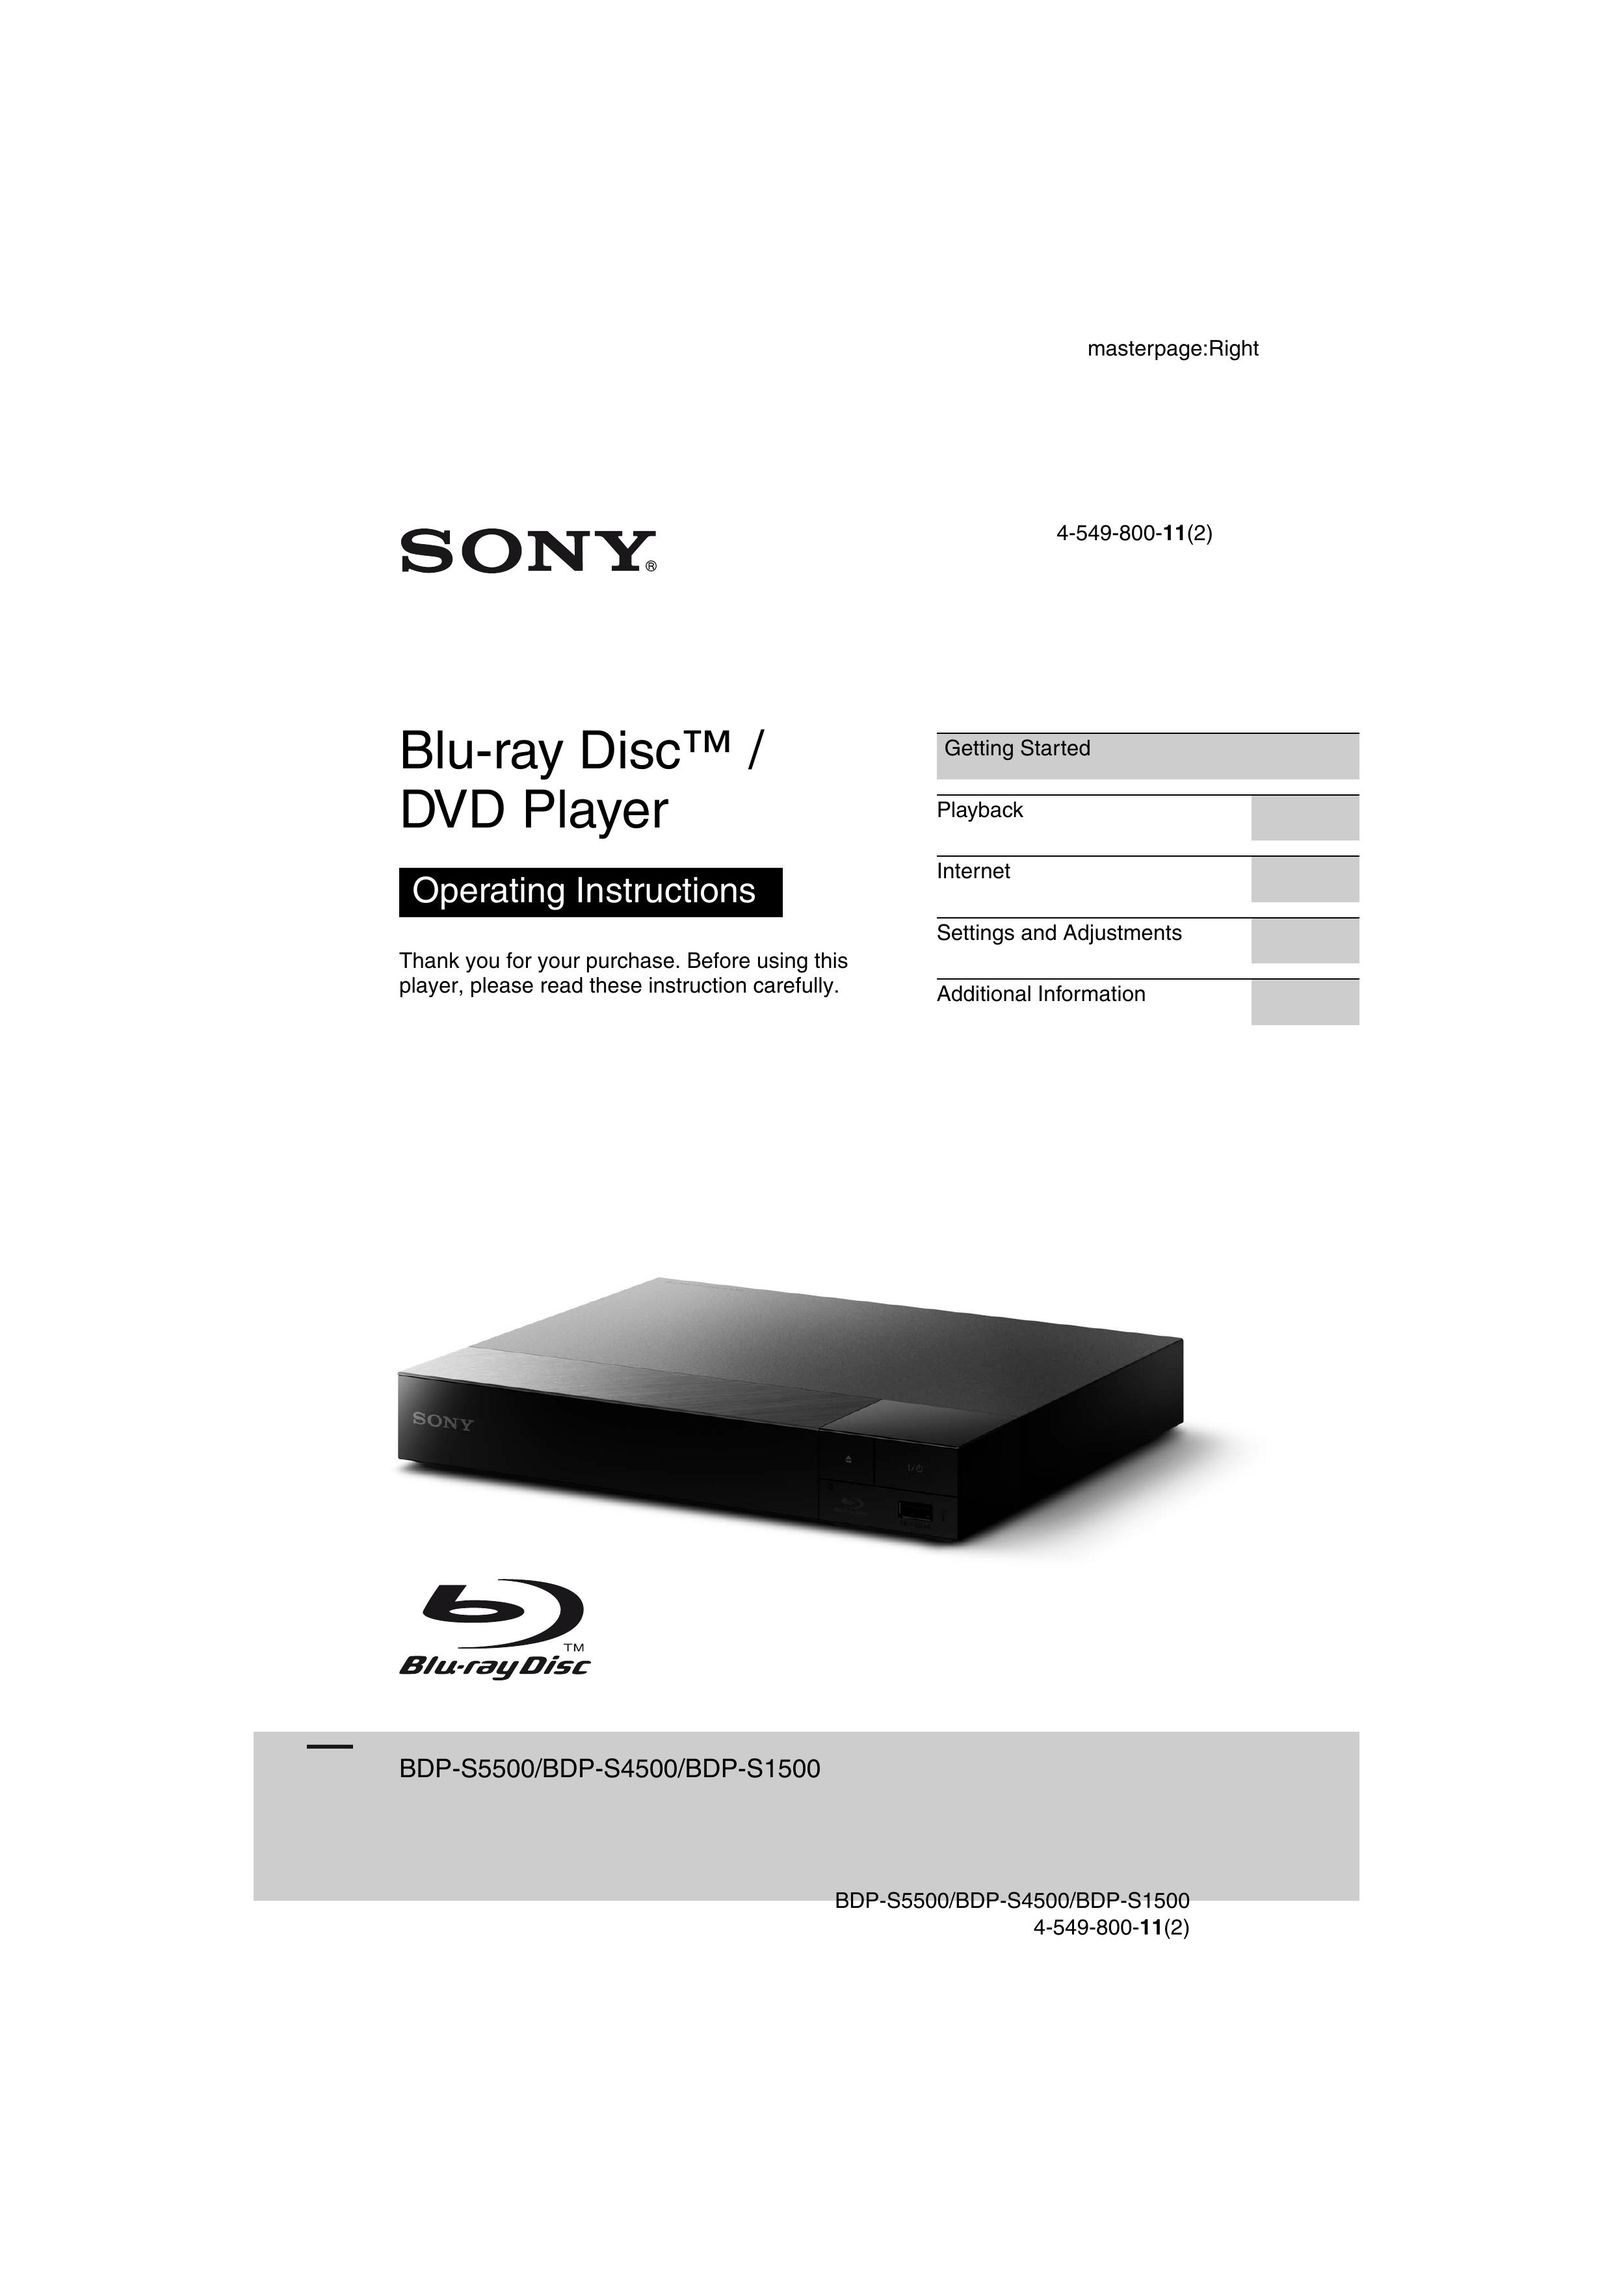 Sony BDP-S1500 Blu-ray Player User Manual